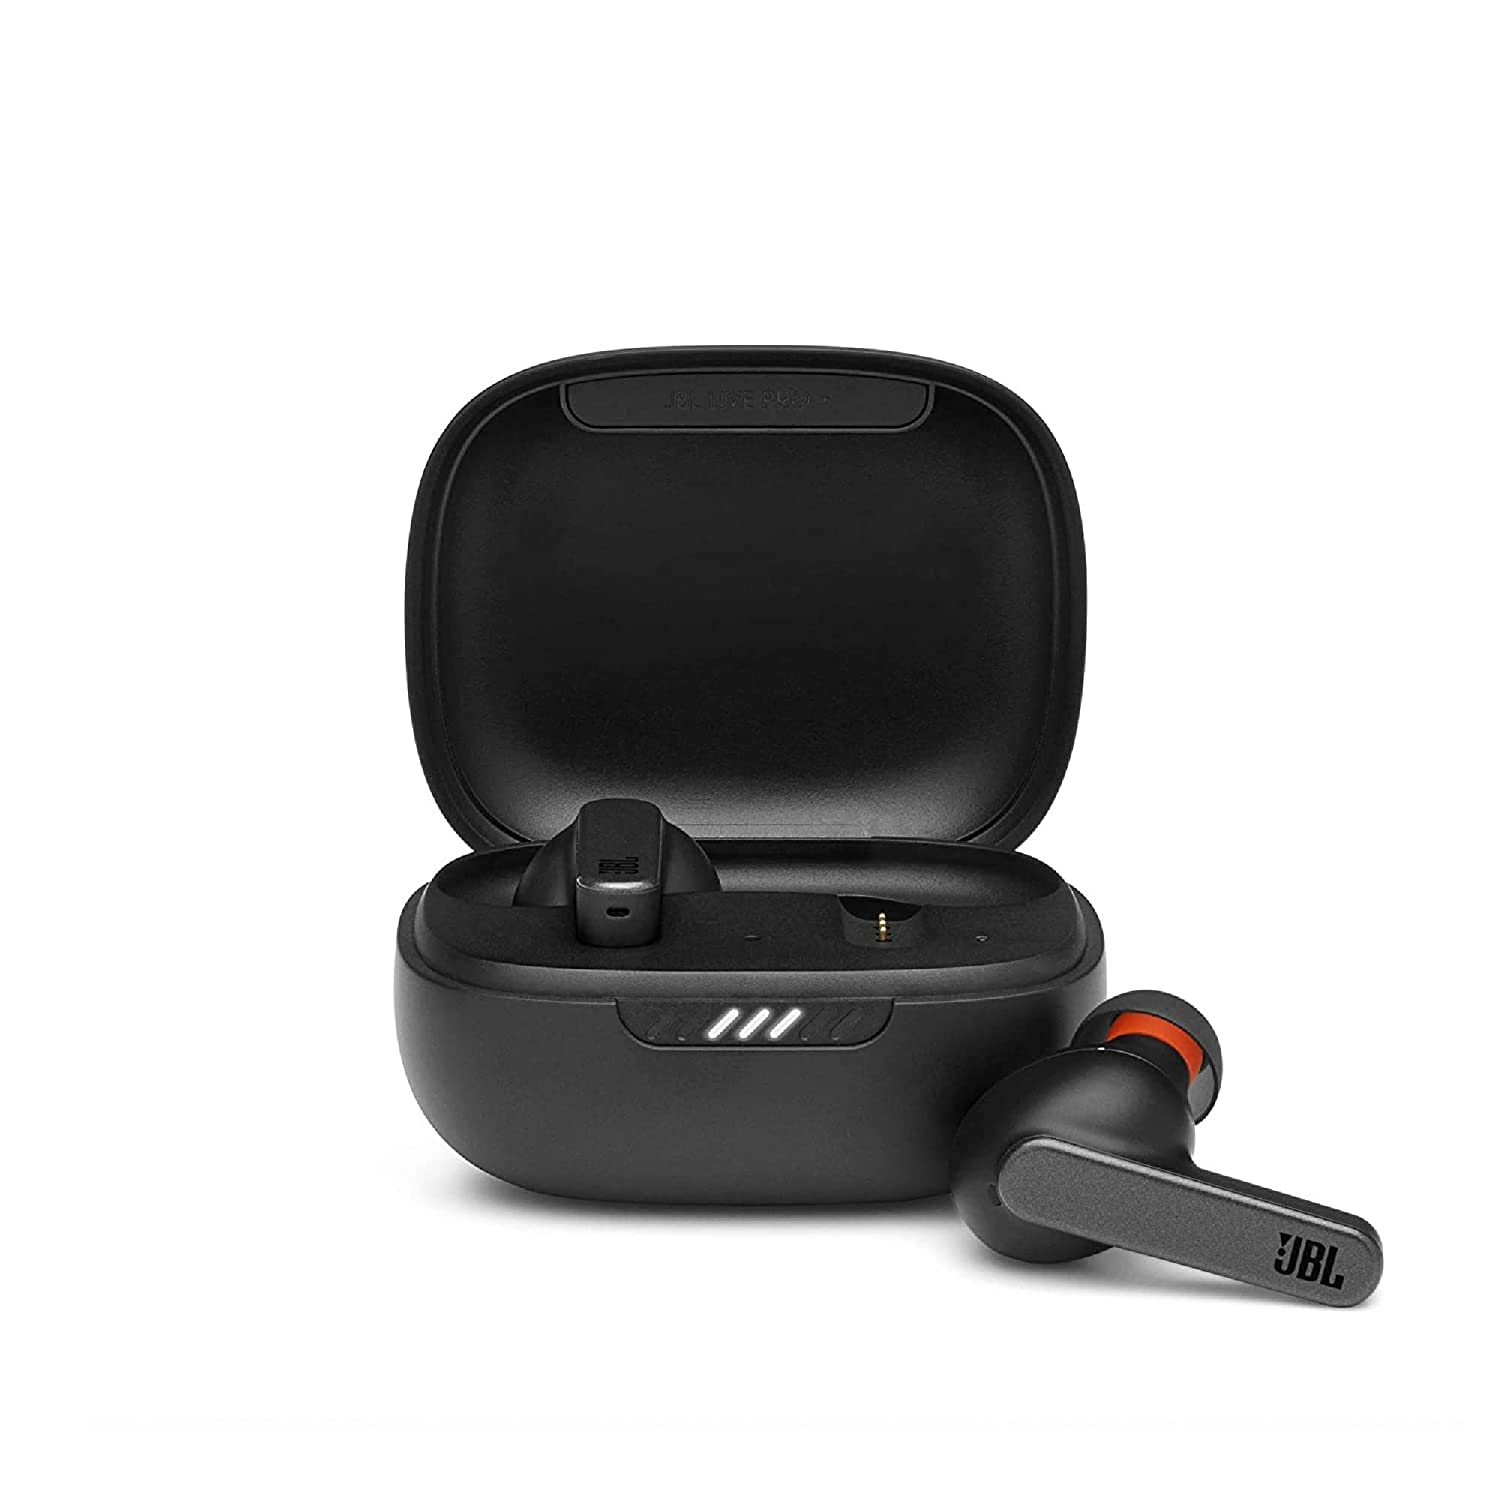 JBL Pro+ TWS Noise Cancelling Earbuds - Black | Le Vend Online | Computer Store in Maldives